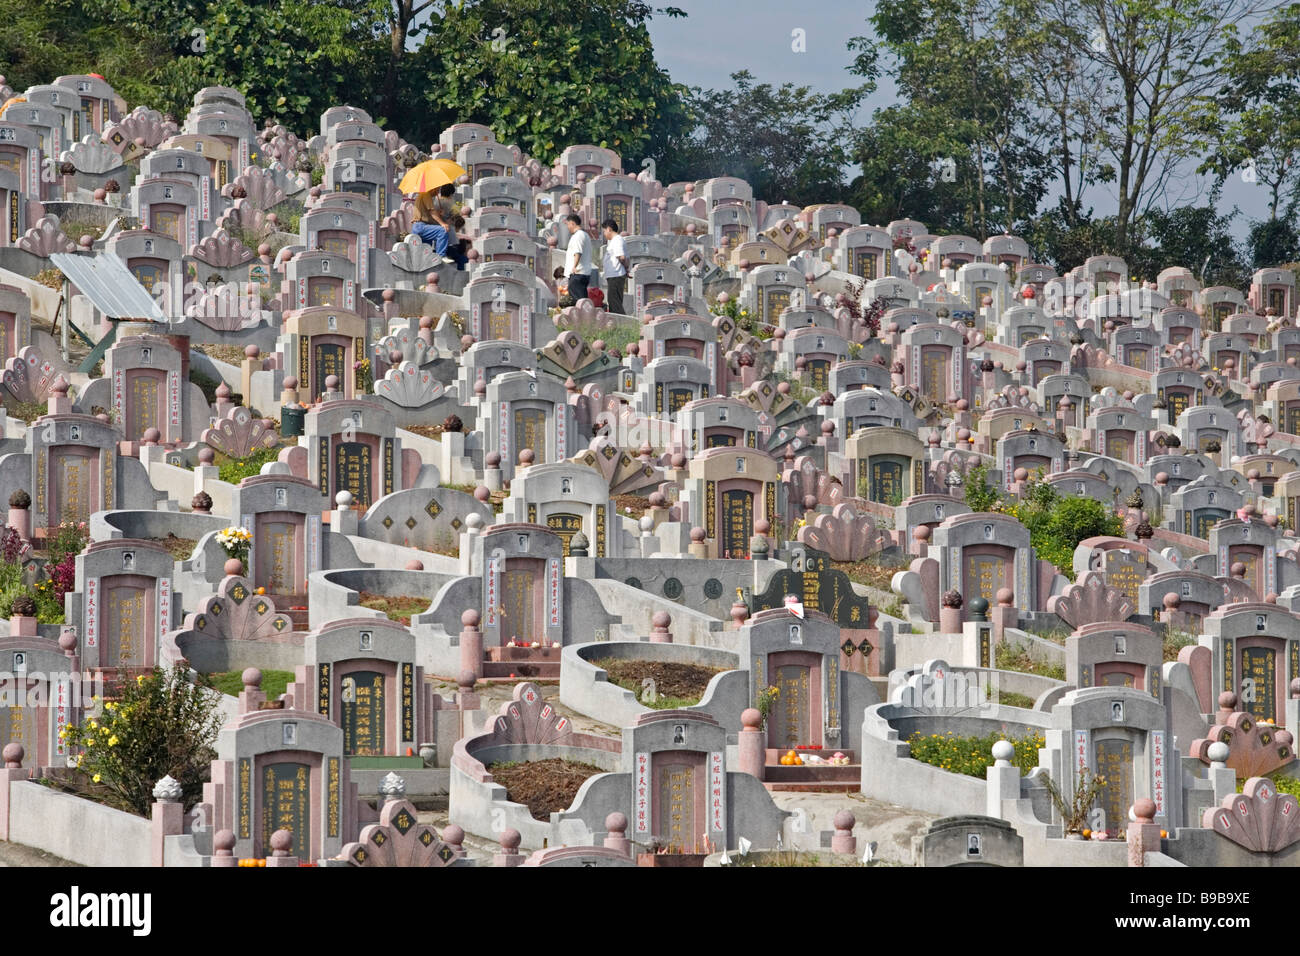 Chinese tombstones during Qing Ming in Malaysia, South East Asia Stock Photo